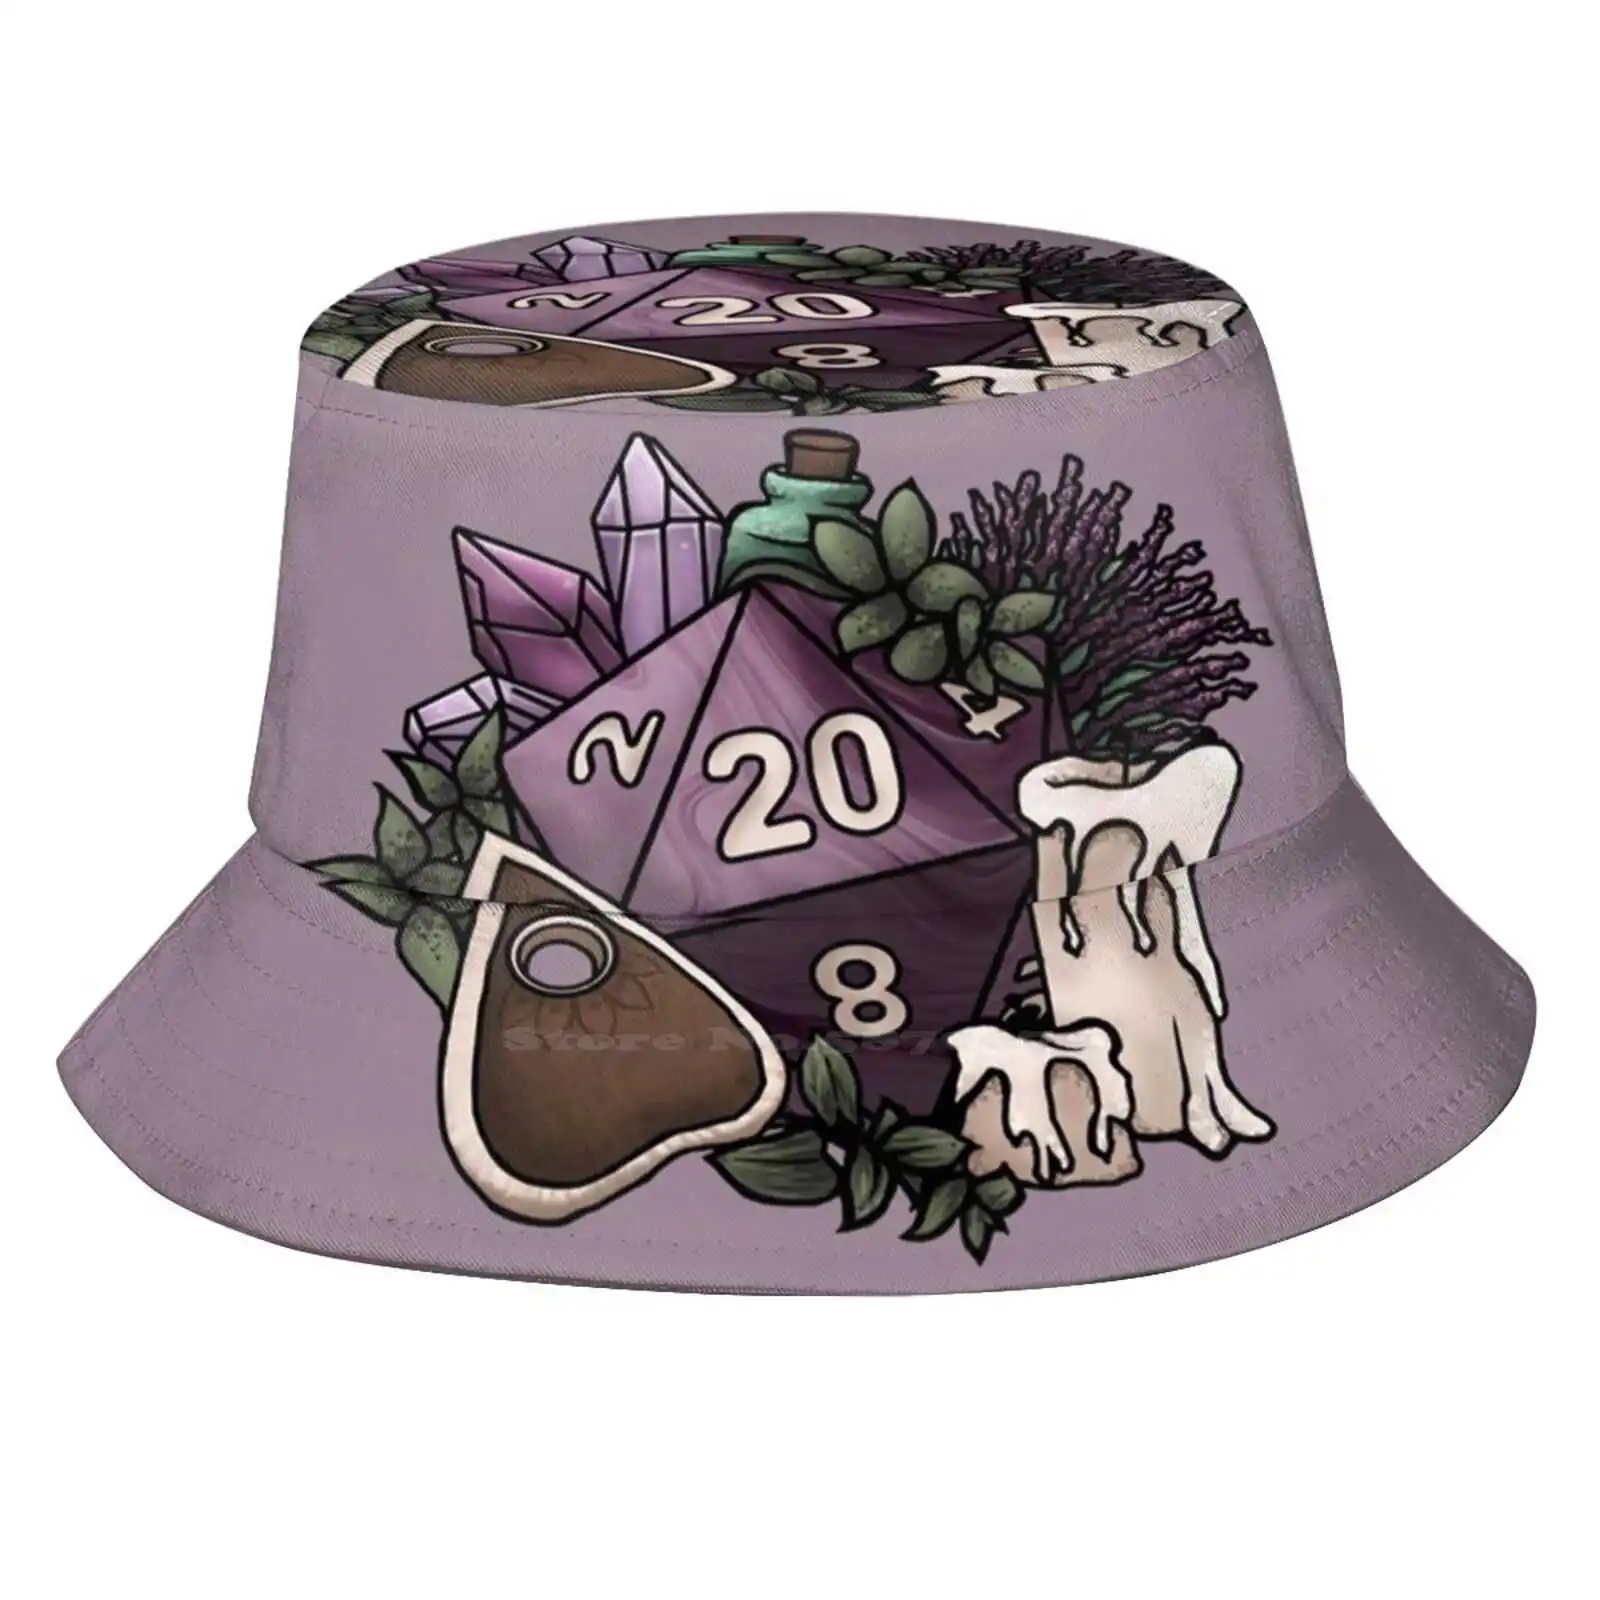 

Witchy D20 Tabletop Rpg Gaming Dice Print Bucket Hats Sun Cap D20 Dnd And Dice Feminine Games Nerdy Geeky Geek Girl Girl Gamer